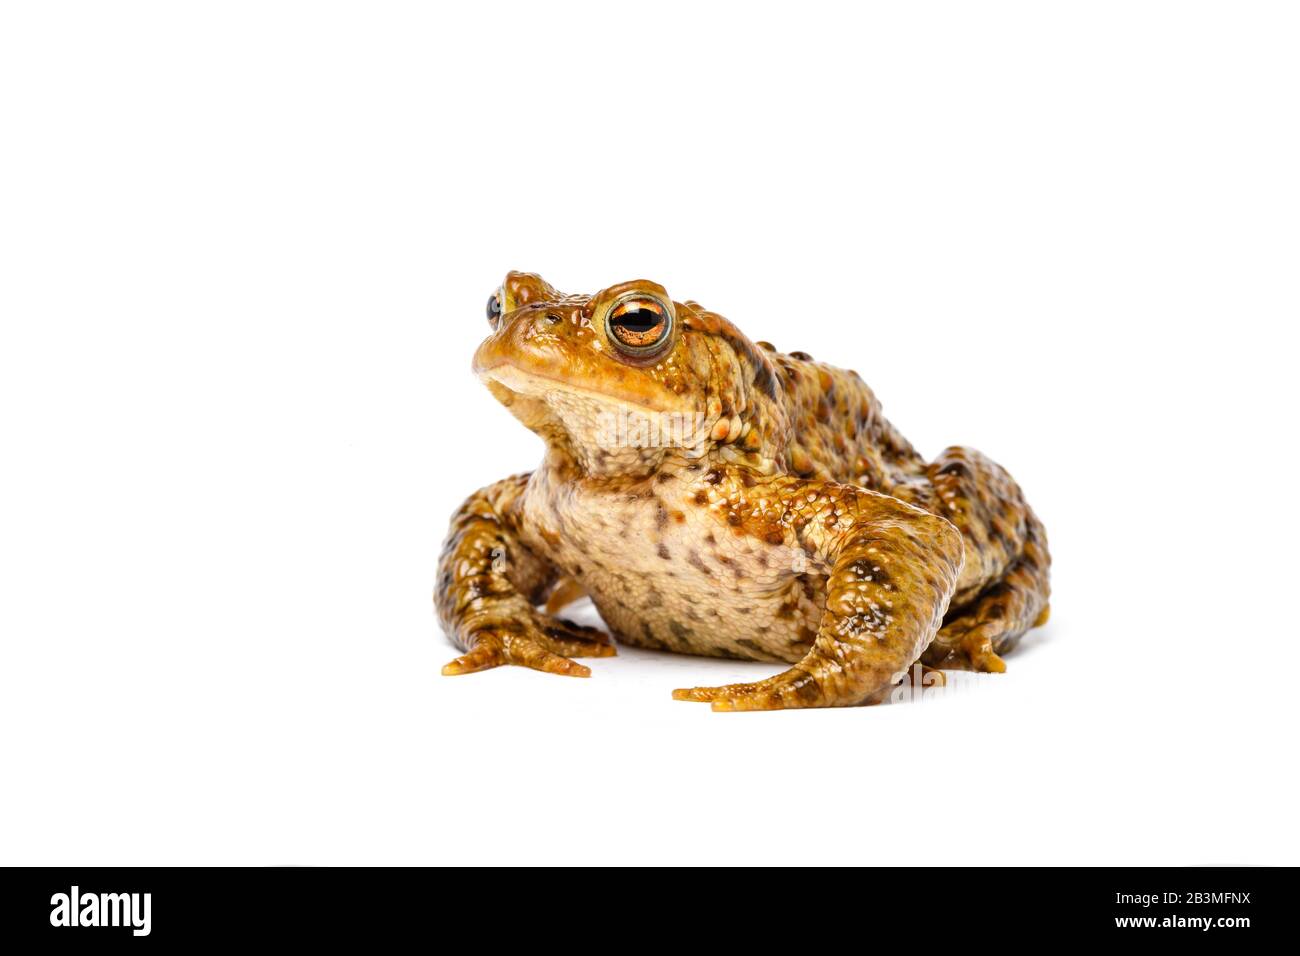 Common Toad, Bufo bufo, on a white background Stock Photo